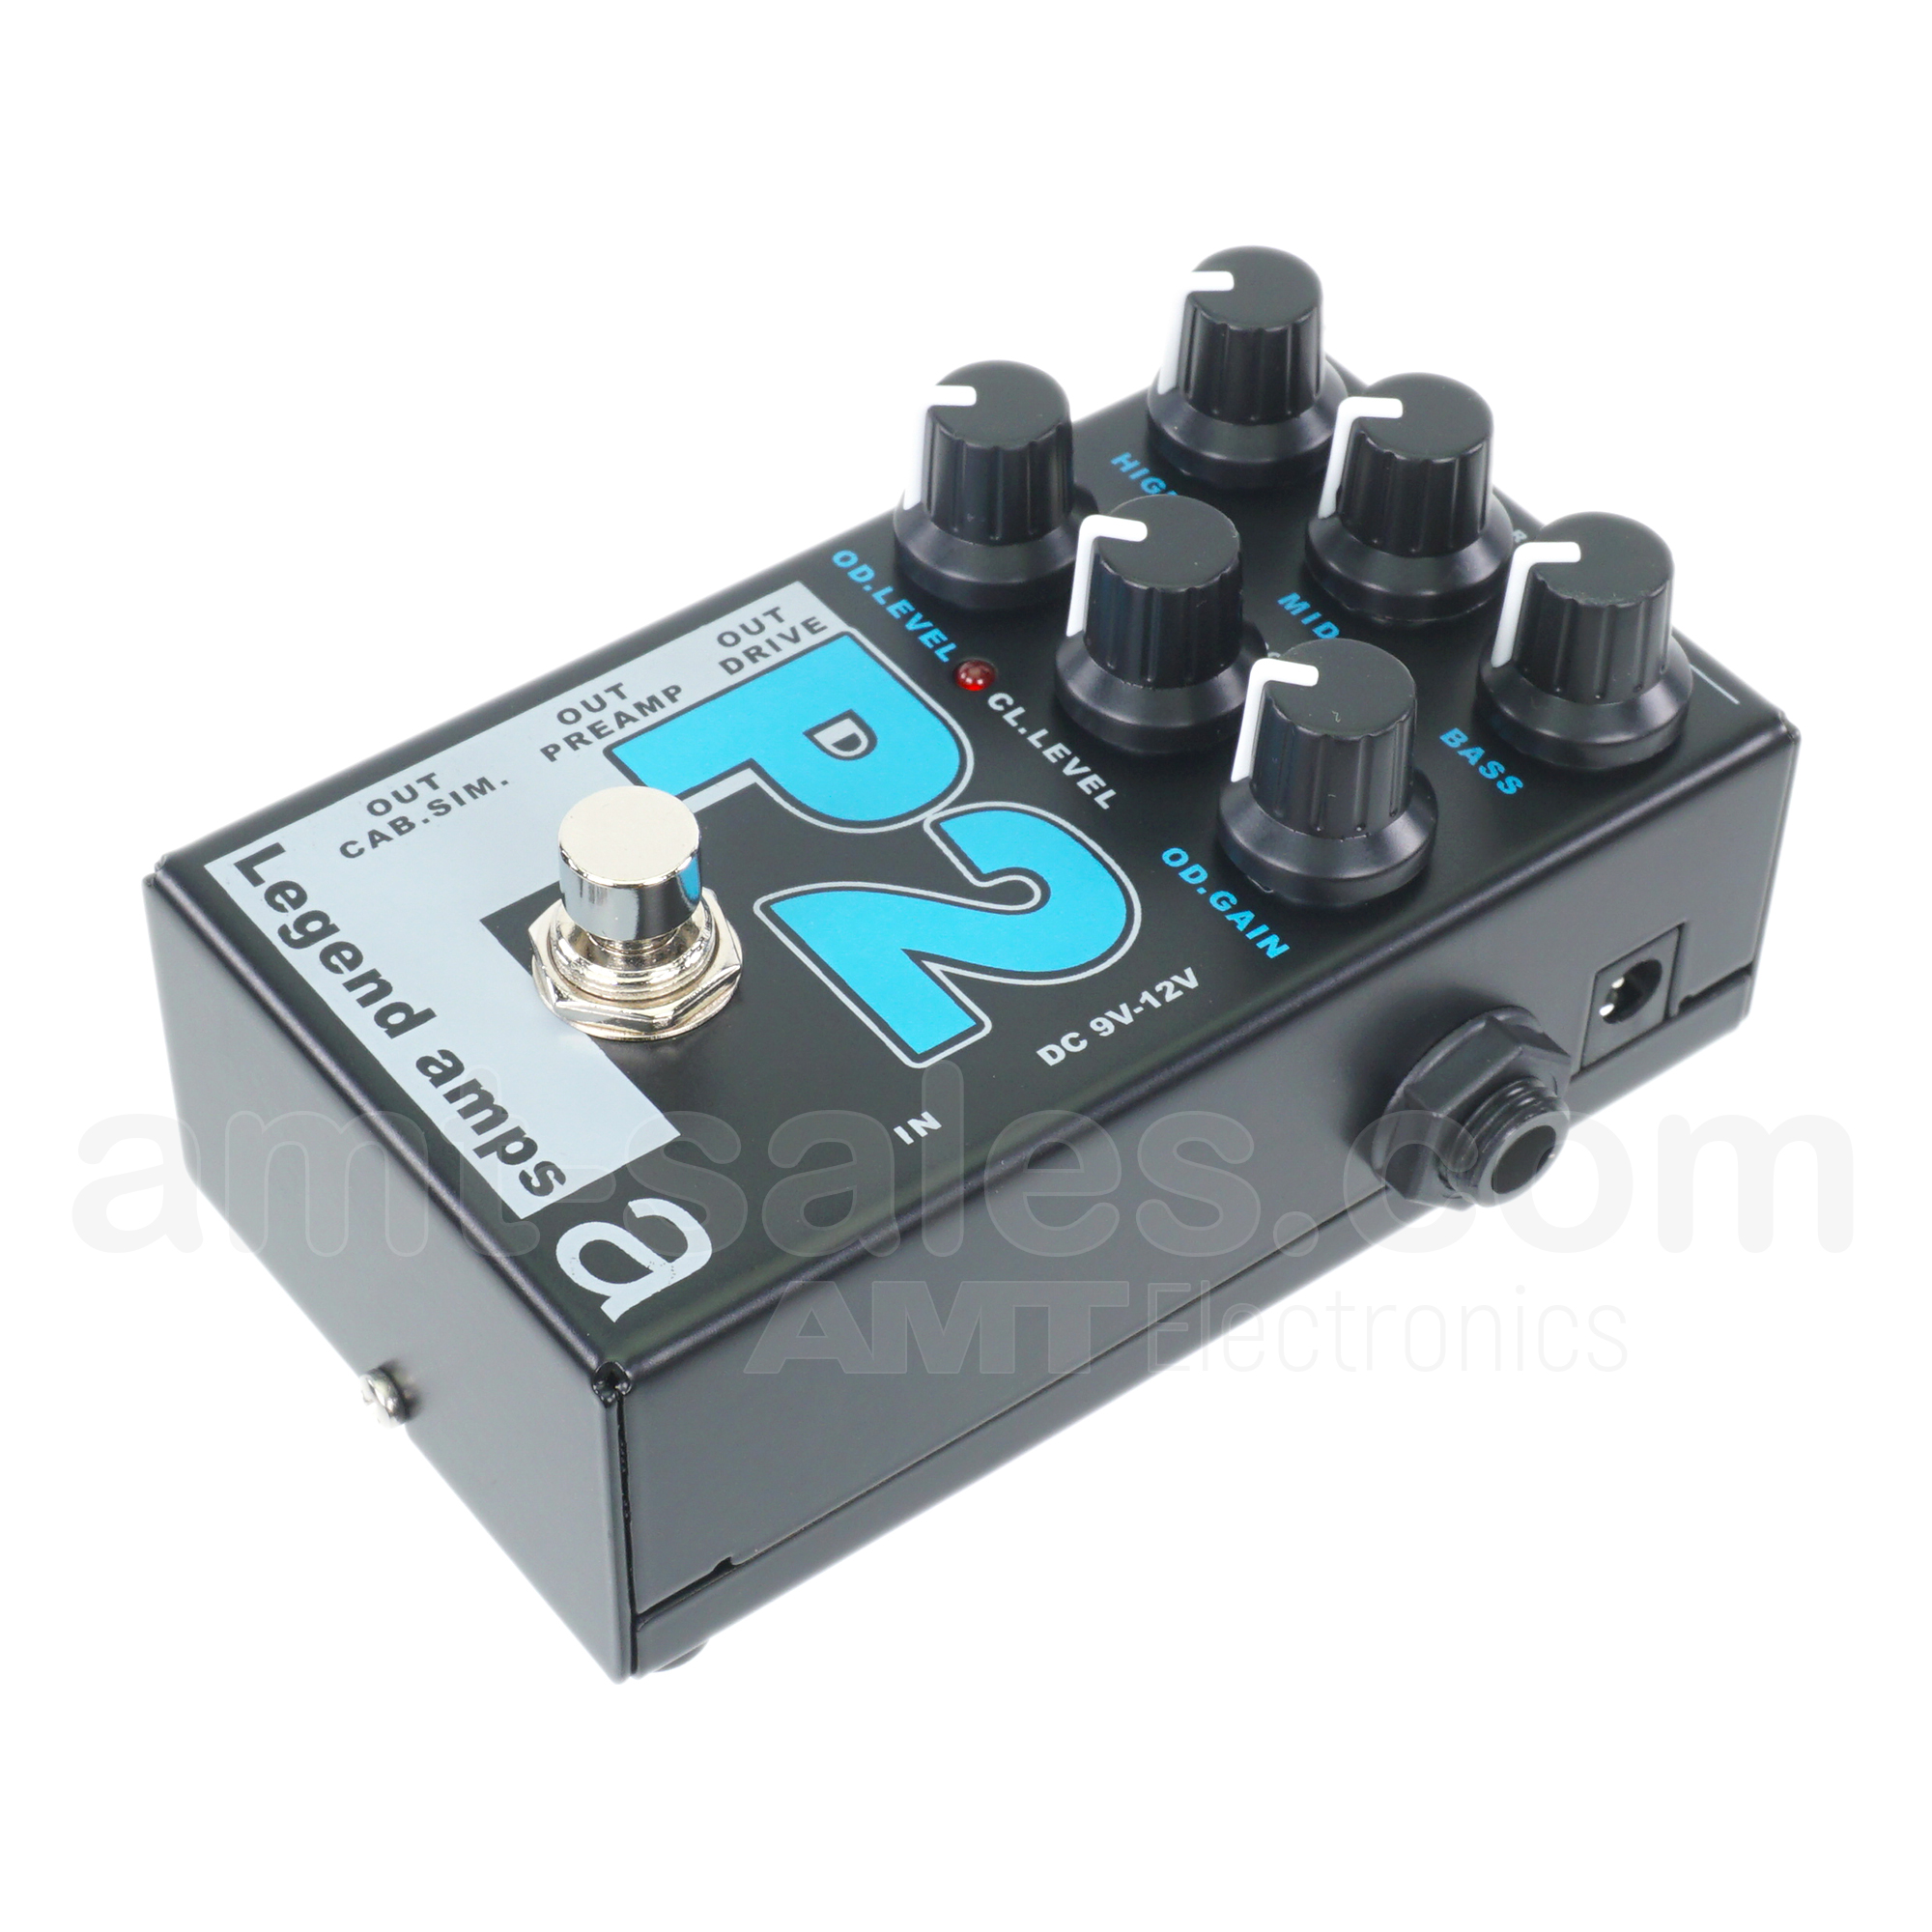 PRE-ORDER! AMT P2 - 2 channels guitar preamp/distortion pedal (Peavey)  (without power supply!)